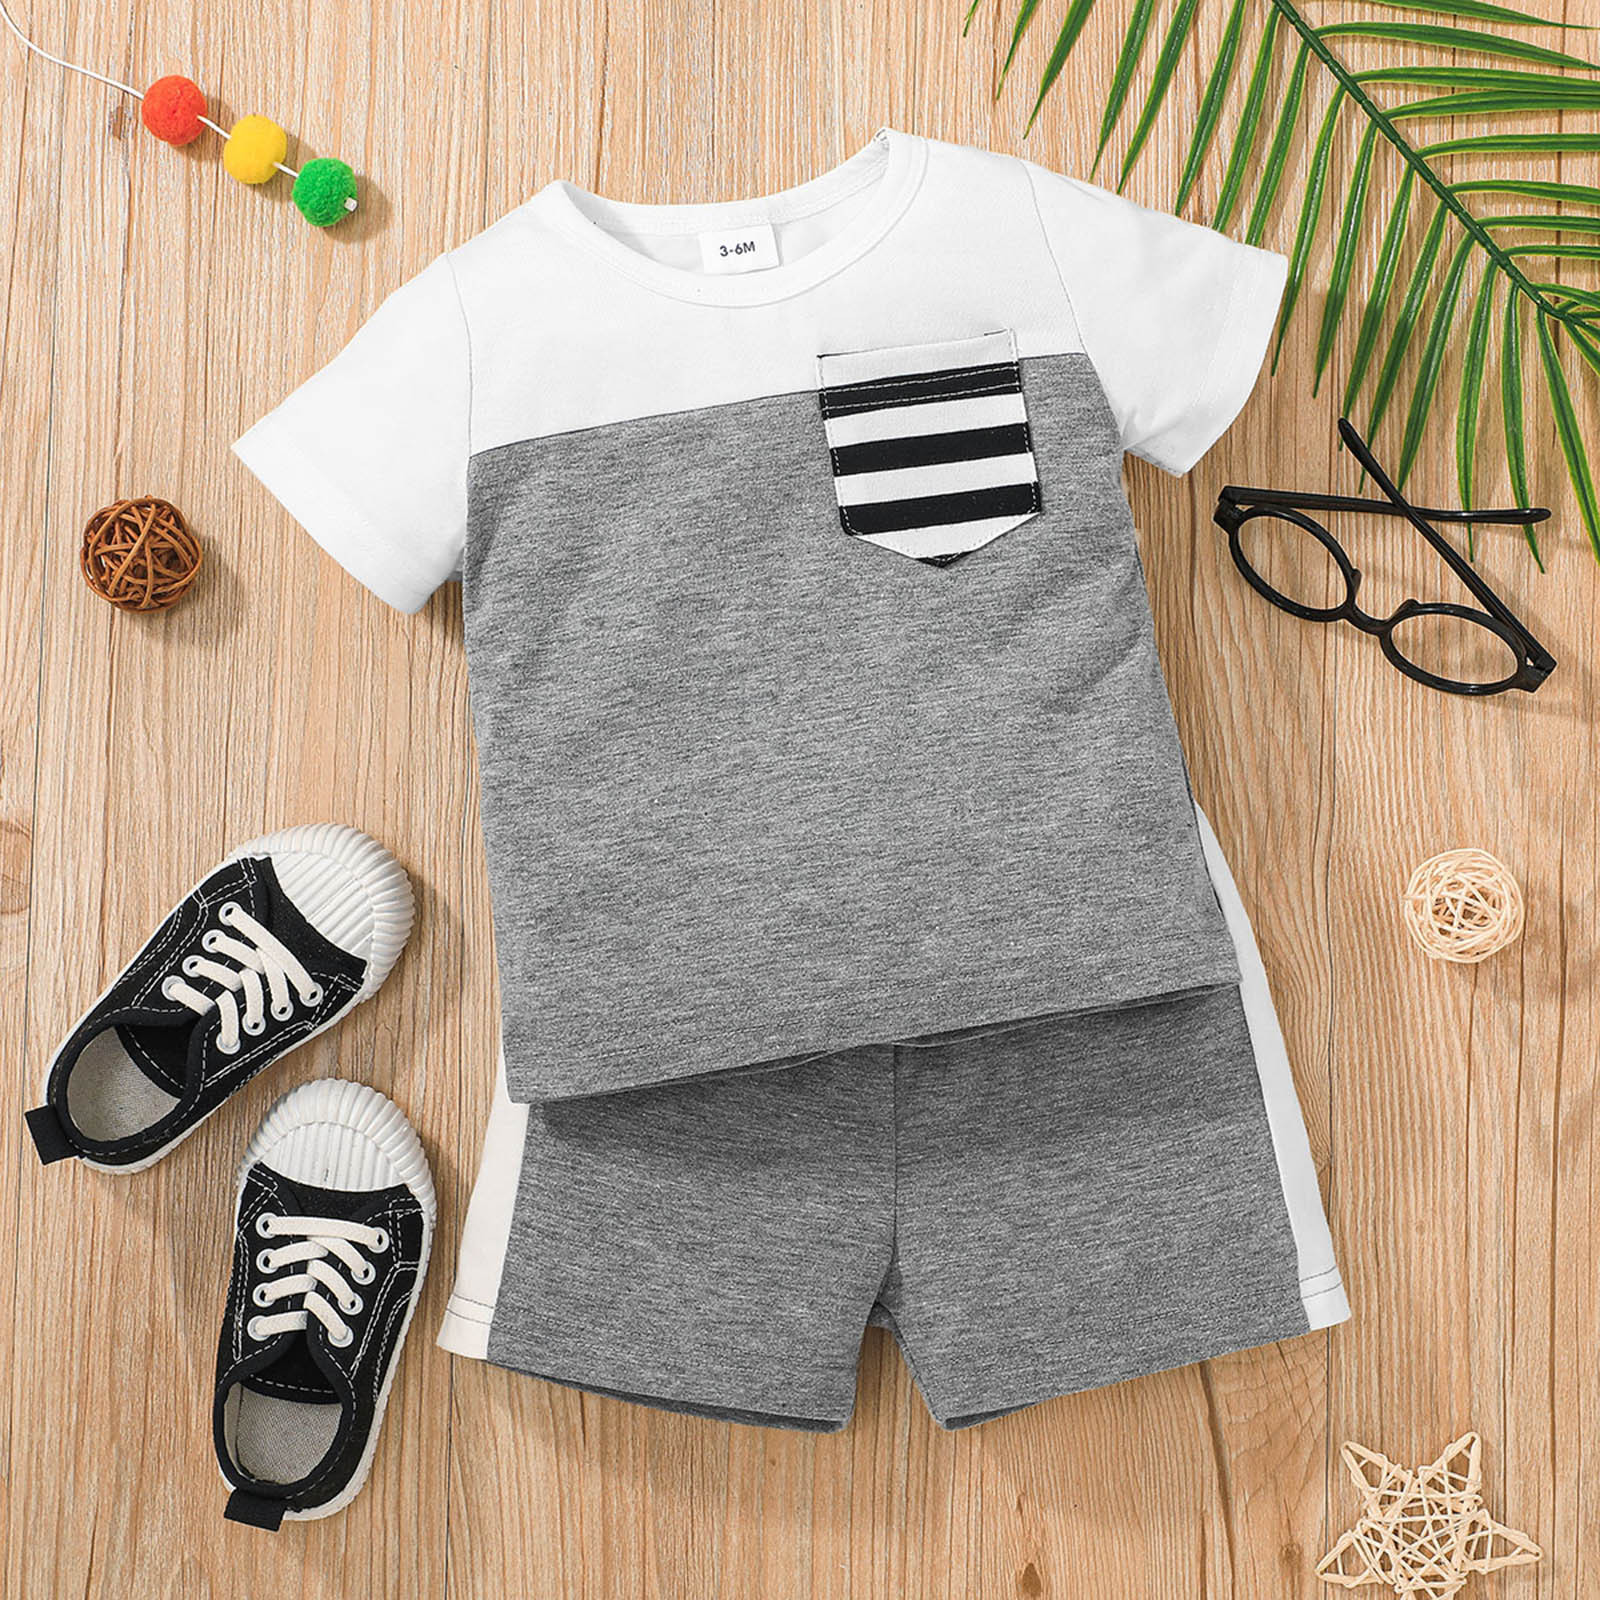 New Born Baby Girl Outfit Baby Clothes Girl Striped T-shirt Boys Sleeve Outfits 3M-24M Baby Sports Girls Short Tops Printed Shorts Girls Outfits&Set Girls Fashion Size 7 8 - image 2 of 9